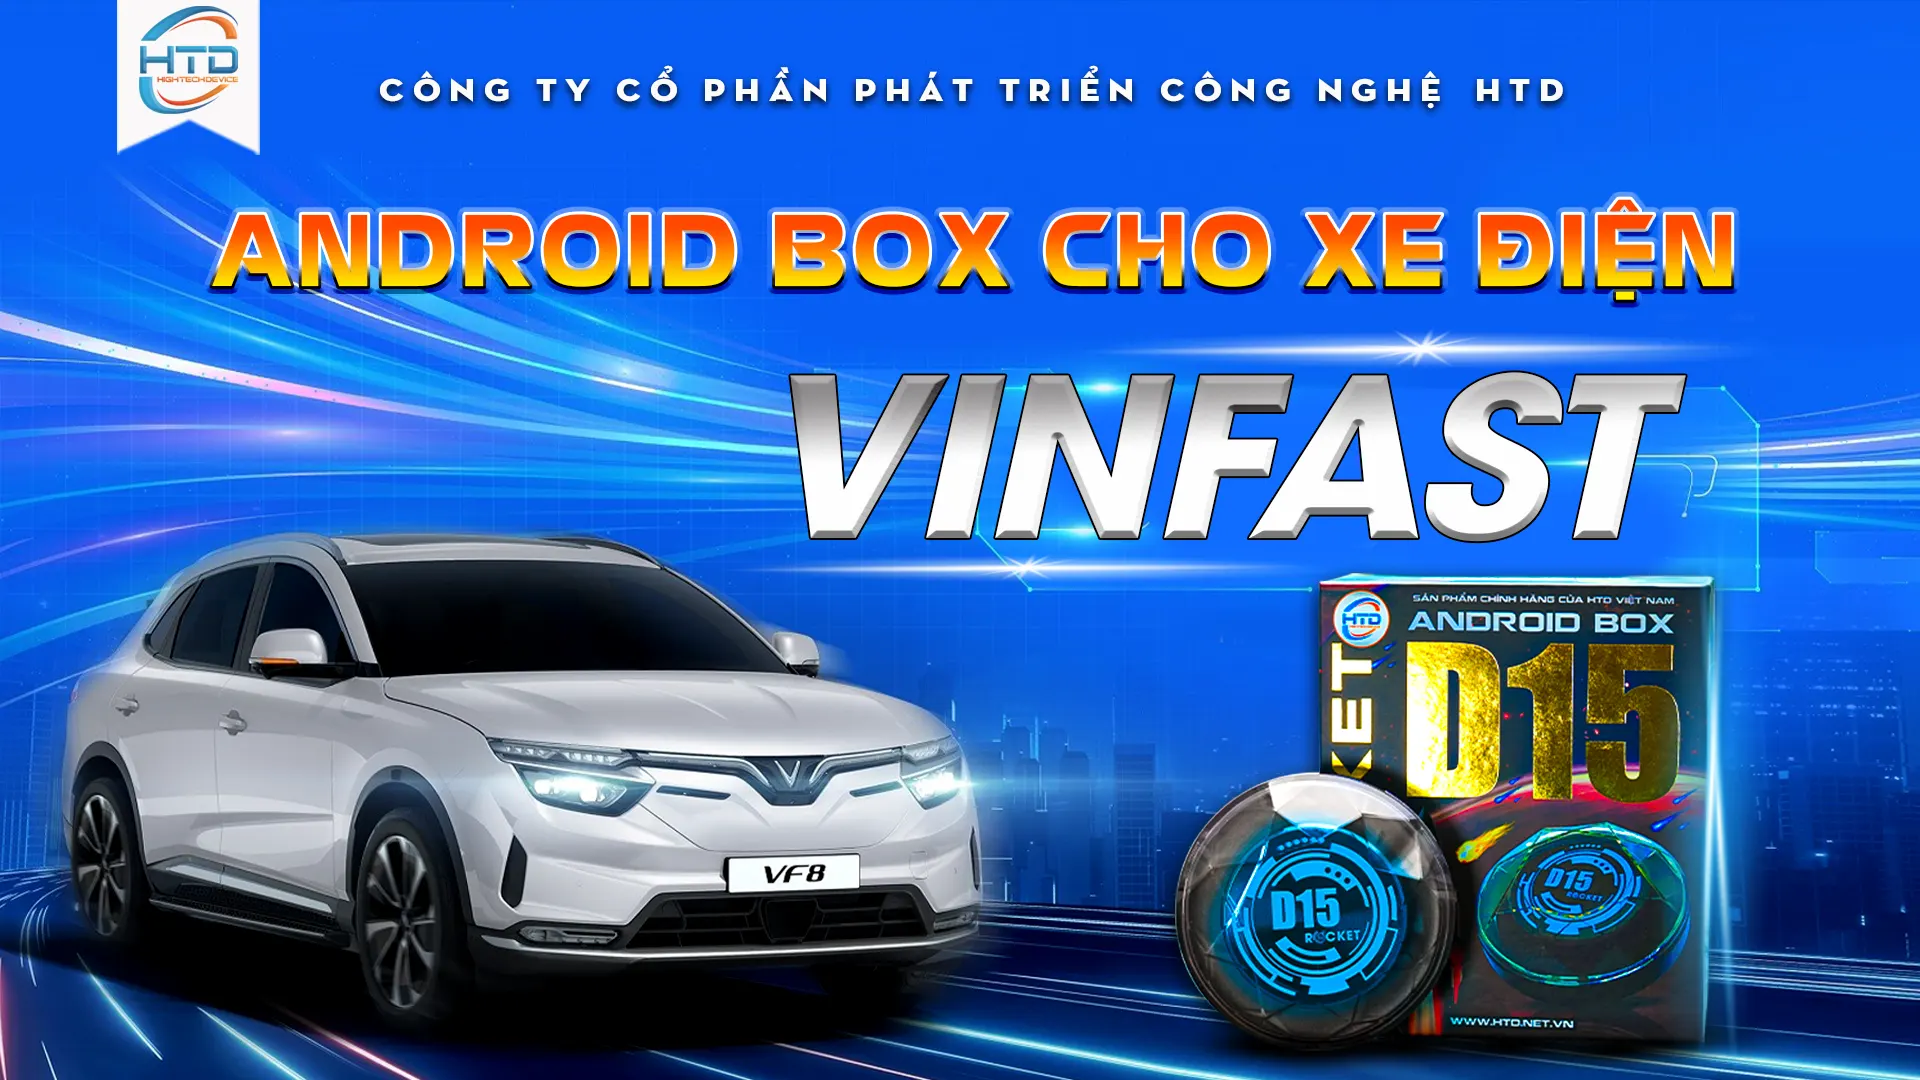 Android box cho xe điện Vinfast